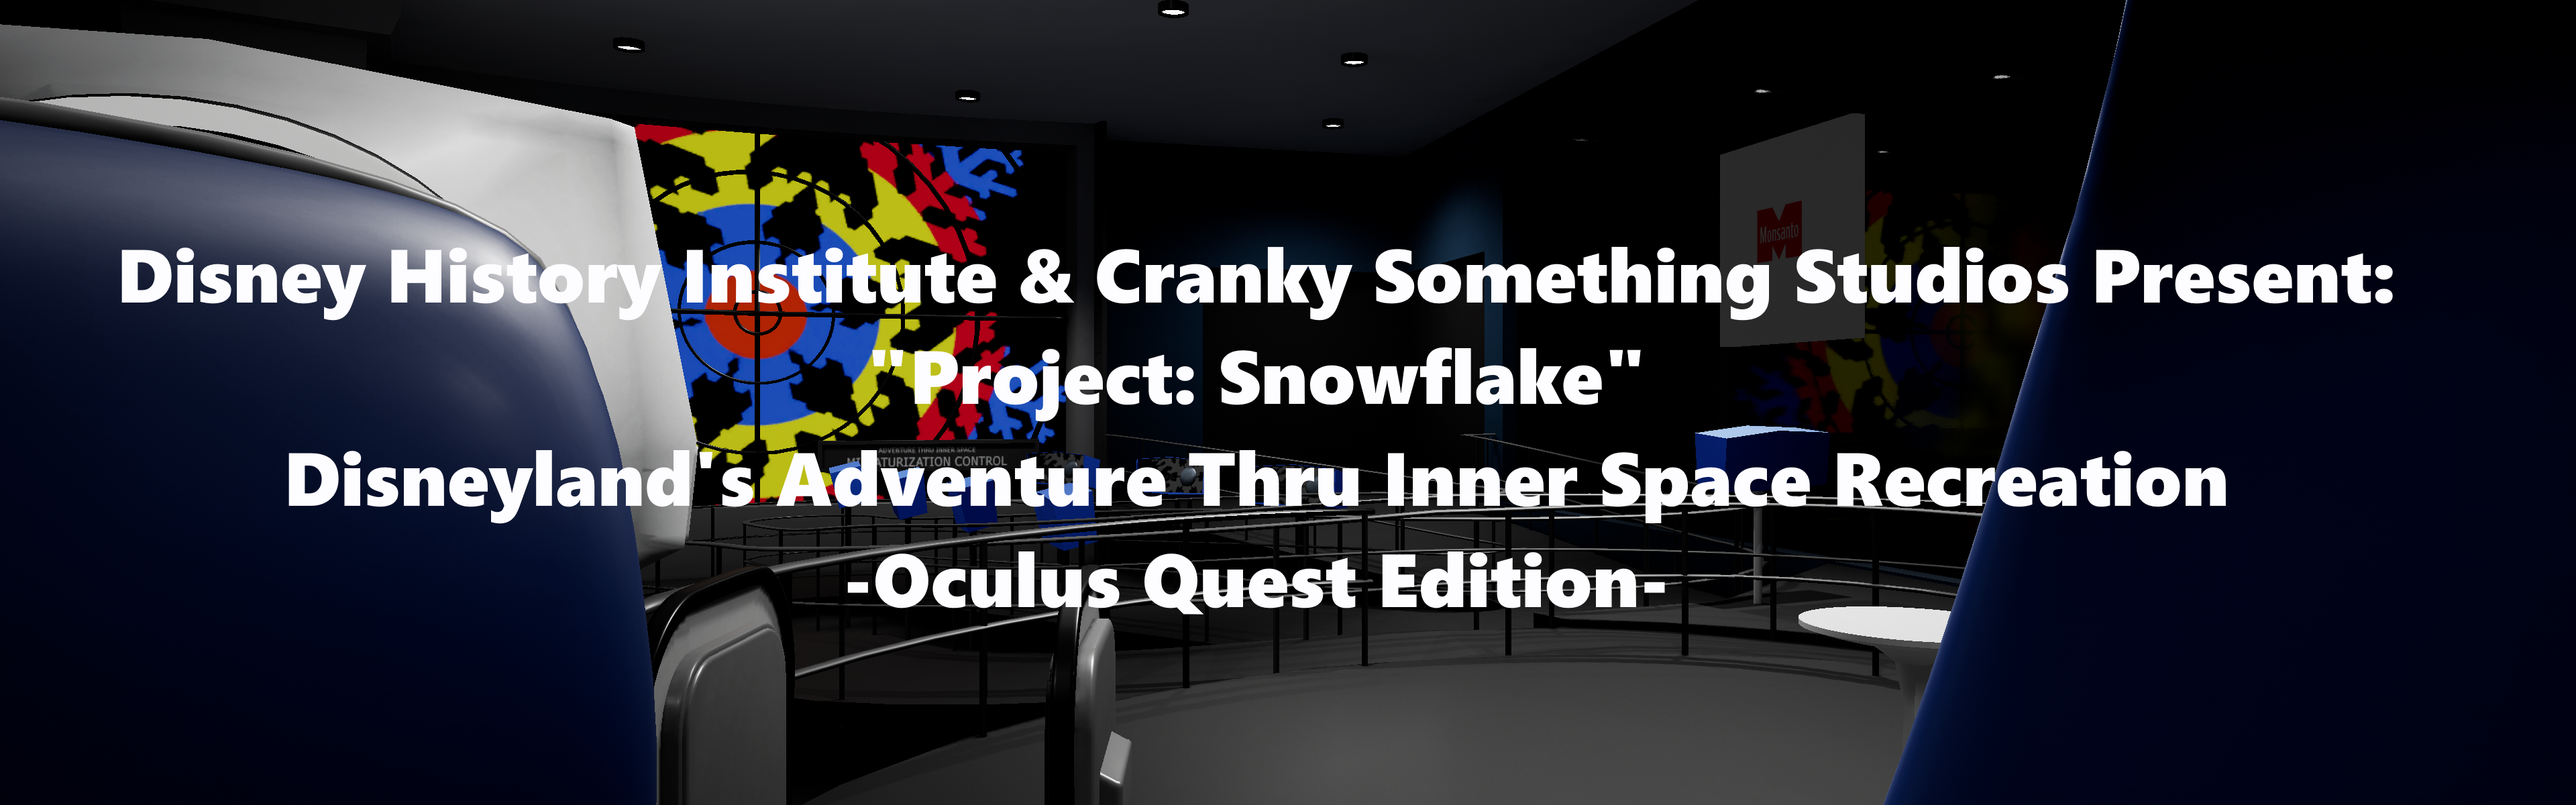 Adventure Thru Inner Space- Project: Snowflake - Quest Edition